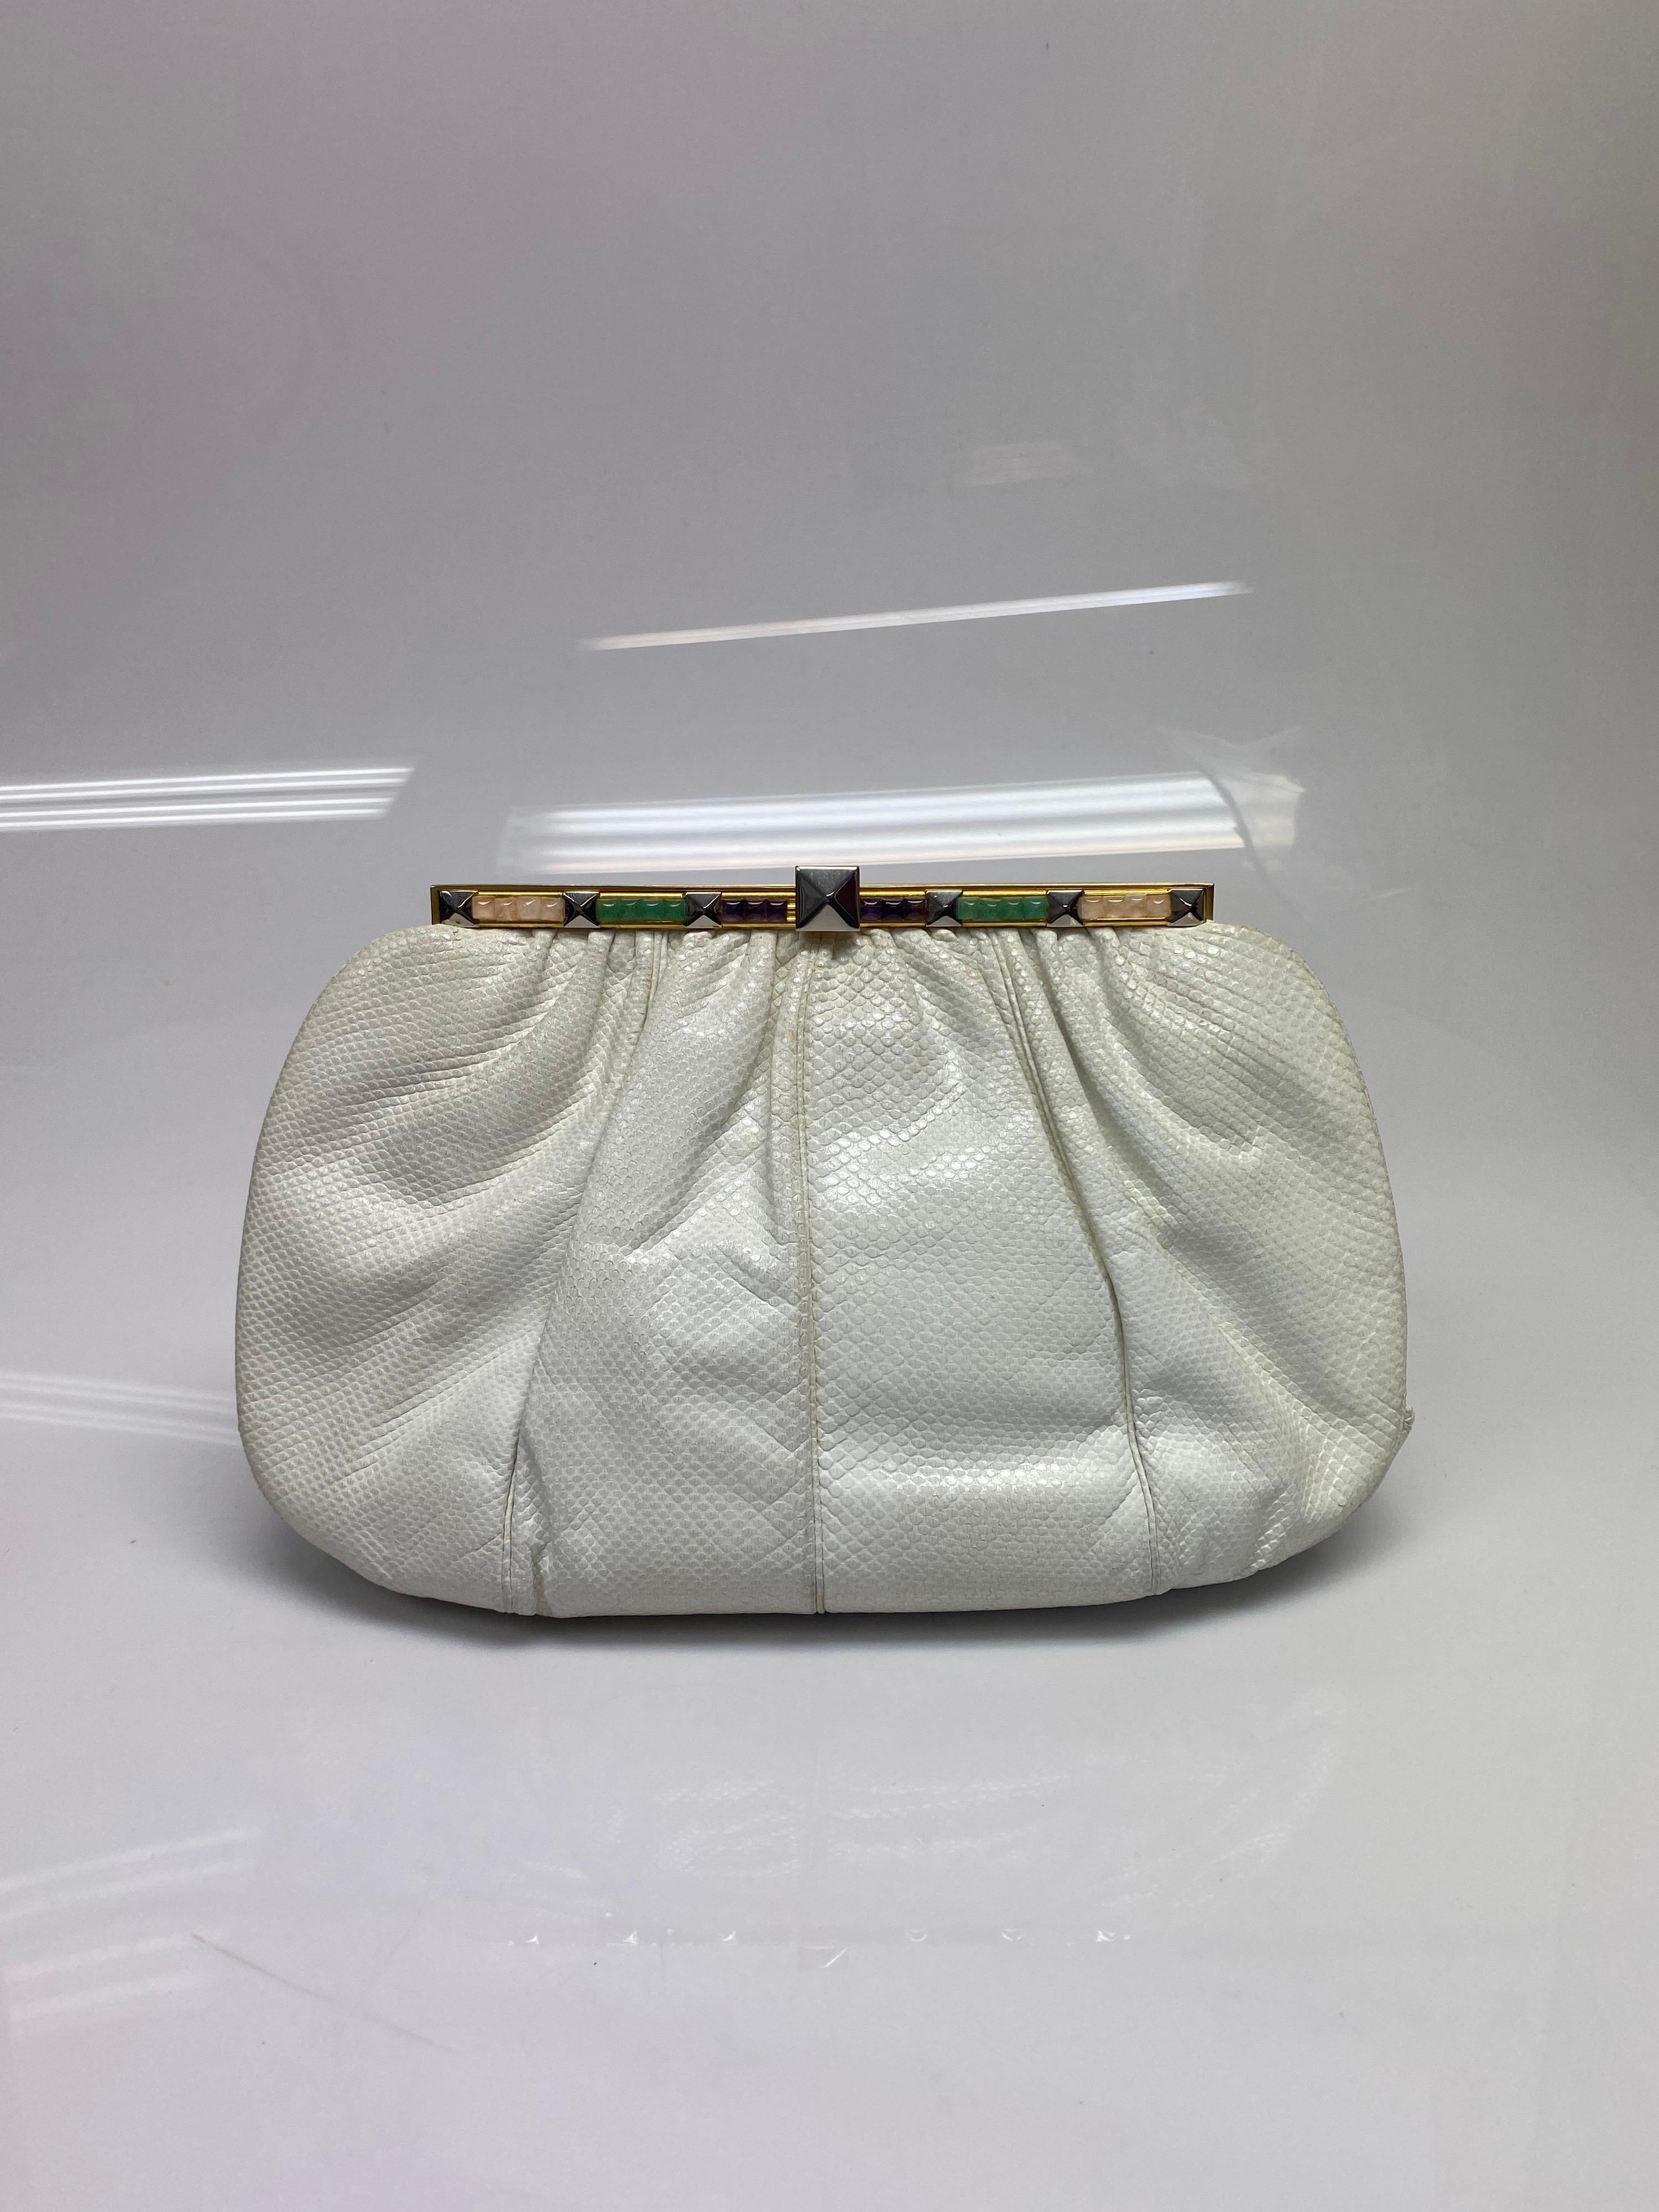 Judith Leiber Ivory Karung Snake Jeweled Clutch. This beautiful vintage bag by Judith Leiber is the perfect addition to any outfit. The bag features gold hardware with a jewel closure. The bag also has loops on each side where you can slide in a